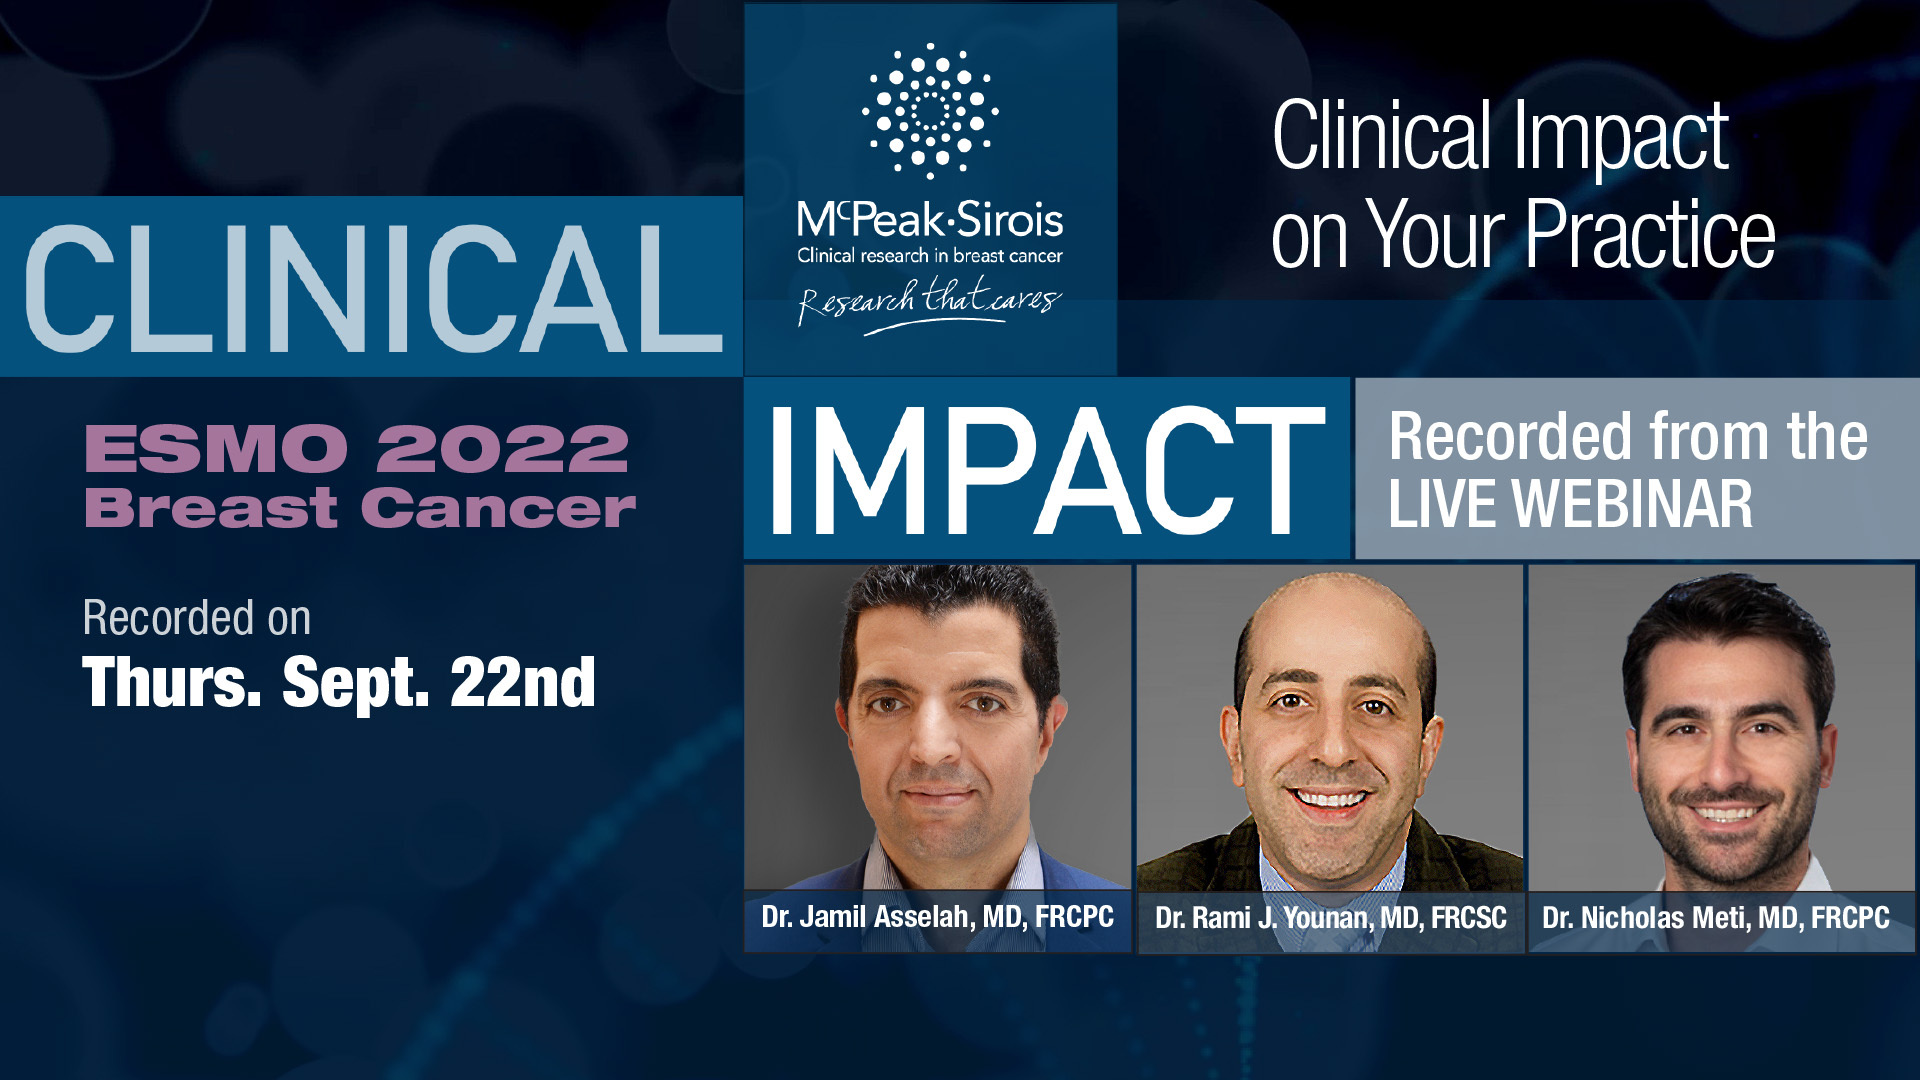 ESMO 2022 Breast Cancer : Clinical Impact on Your Practice